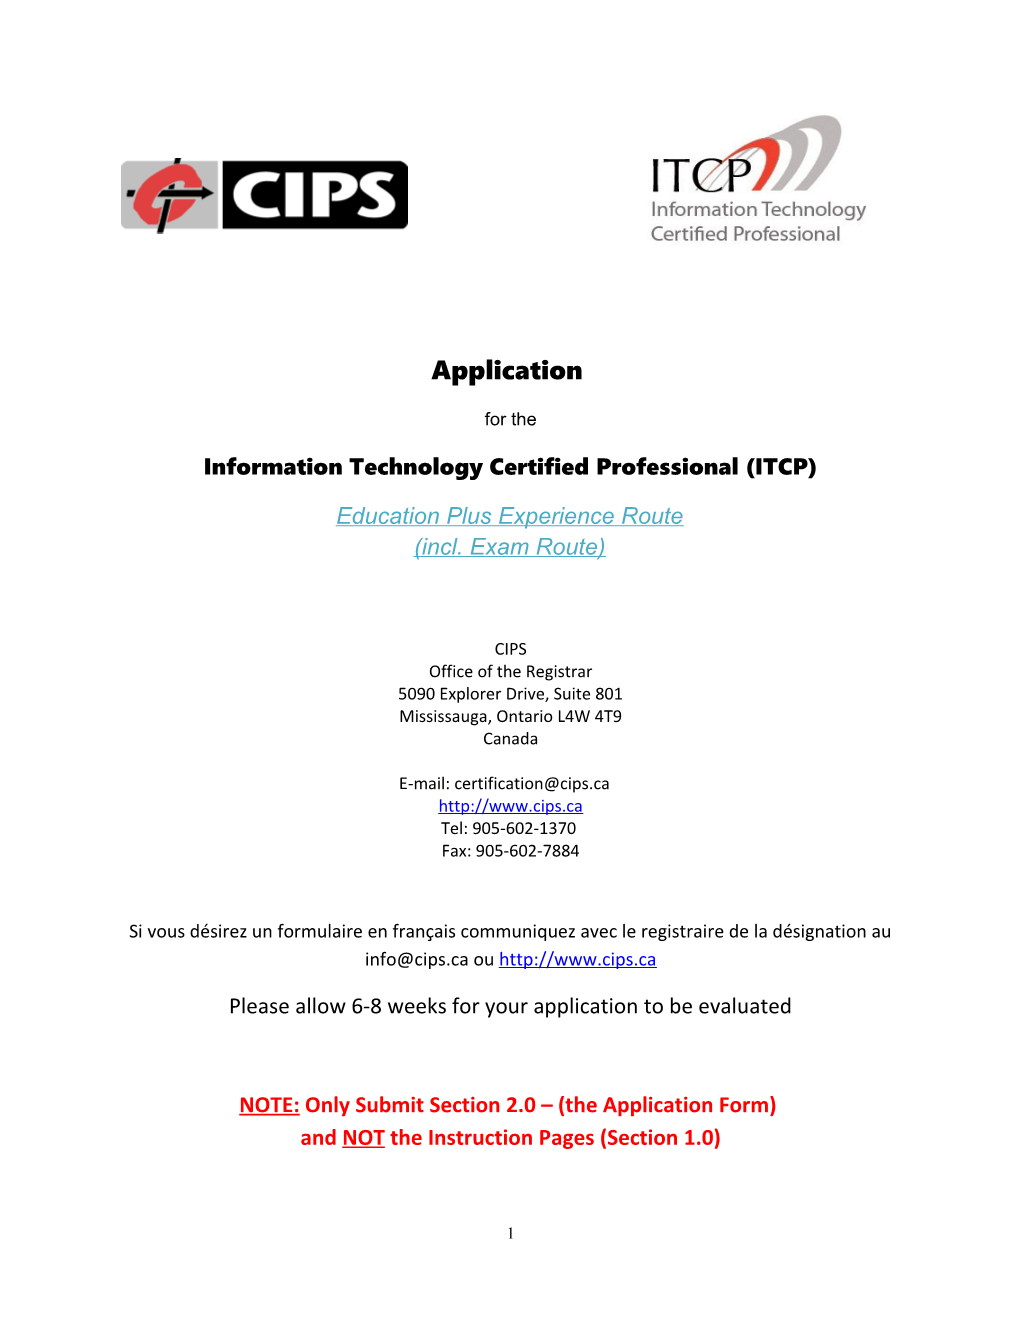 Information Technology Certified Professional (ITCP)